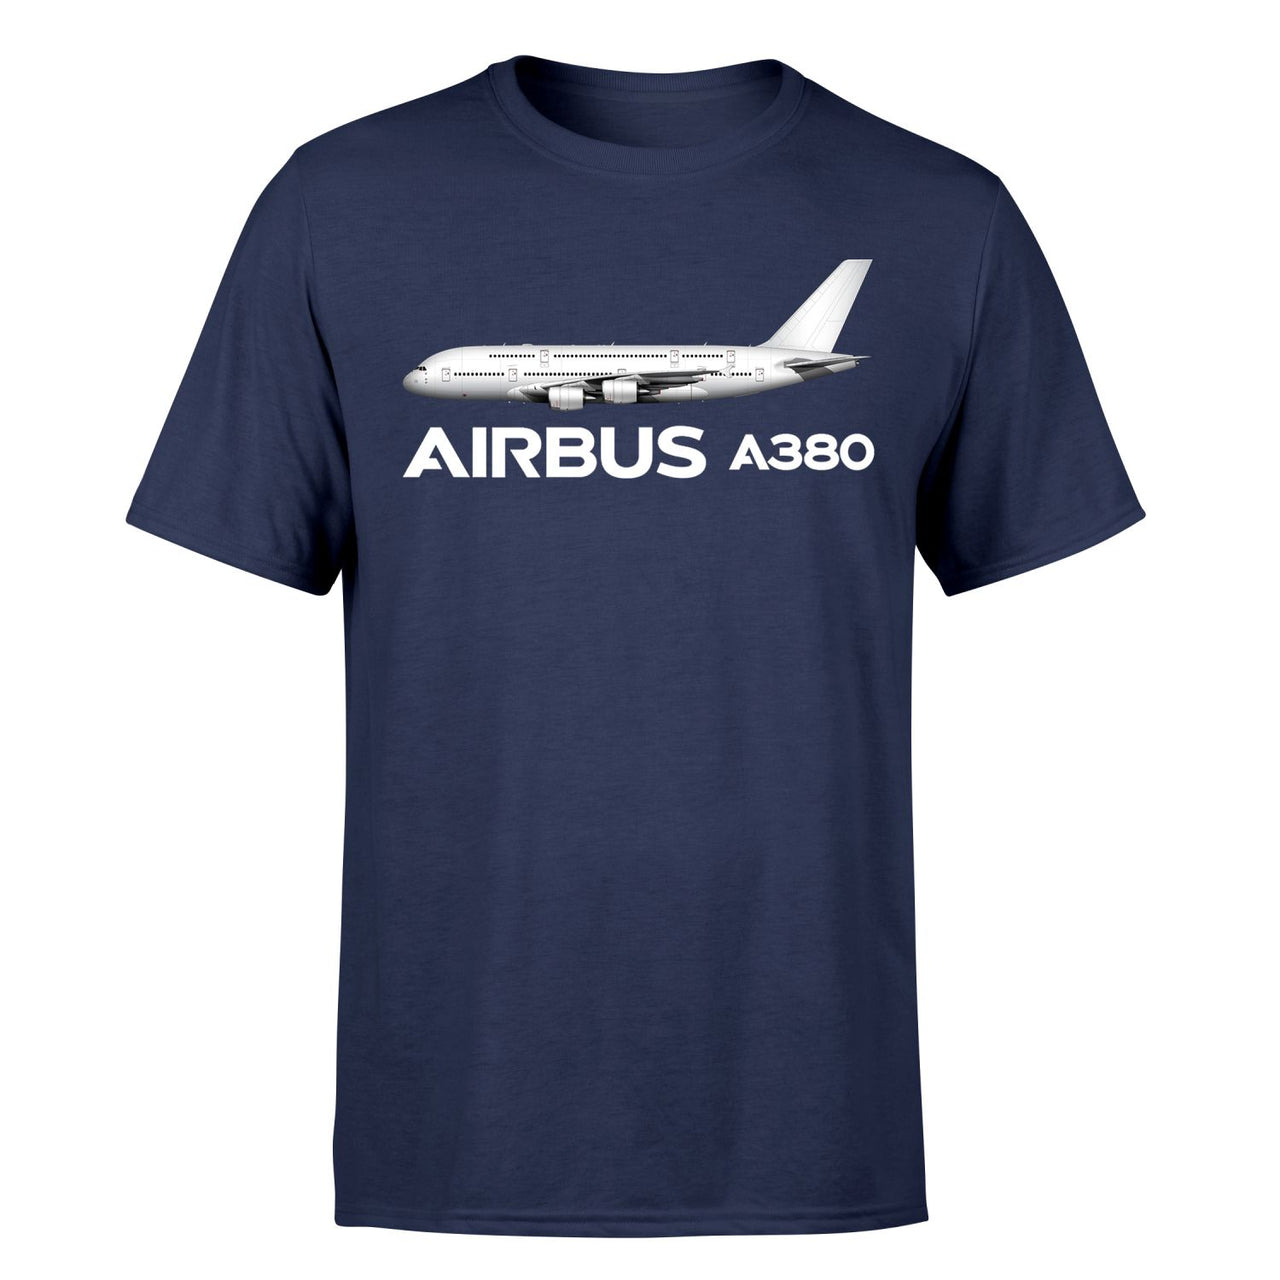 The Airbus A380 Designed T-Shirts